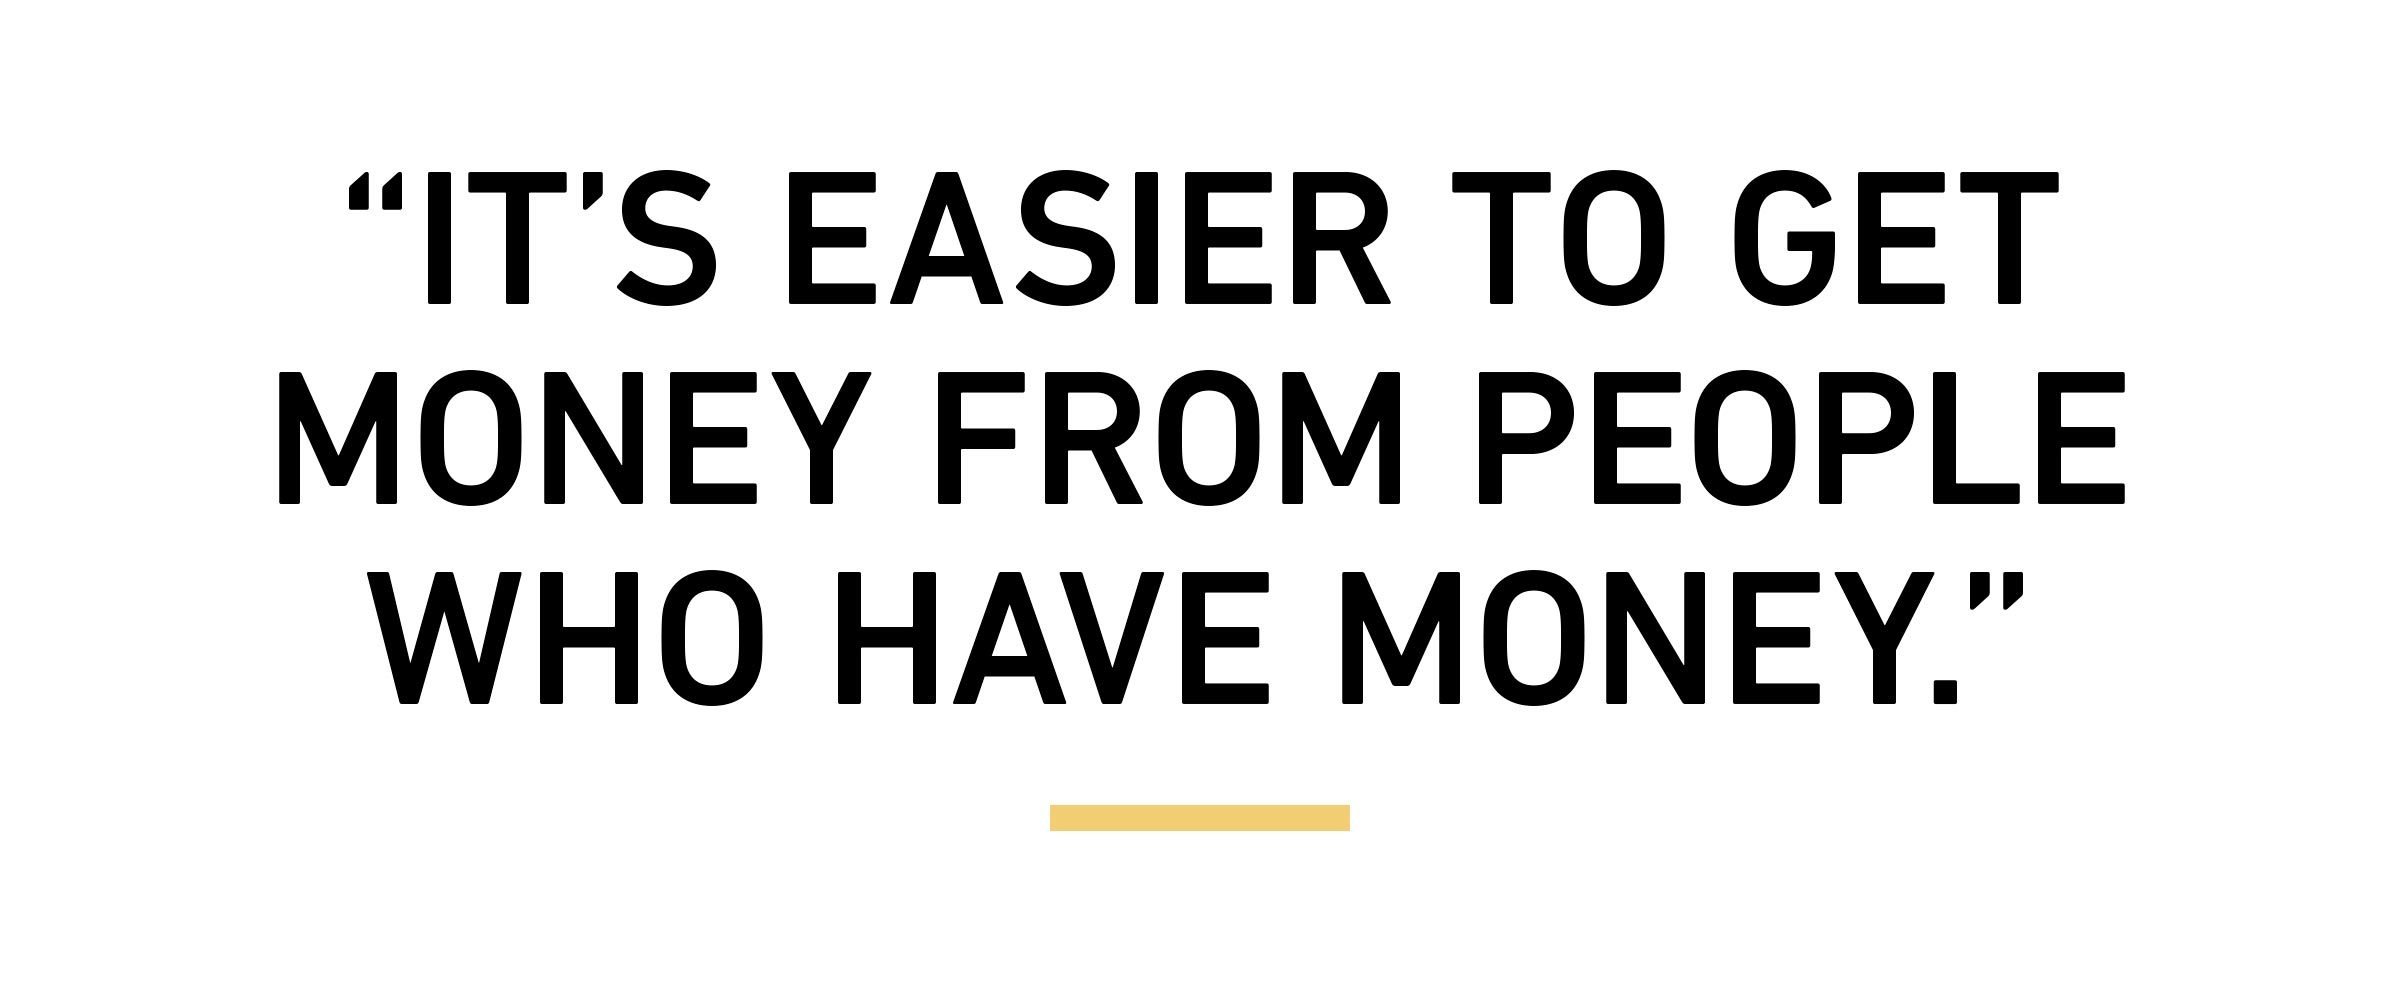 “It’s easier to get money from people who have money.”